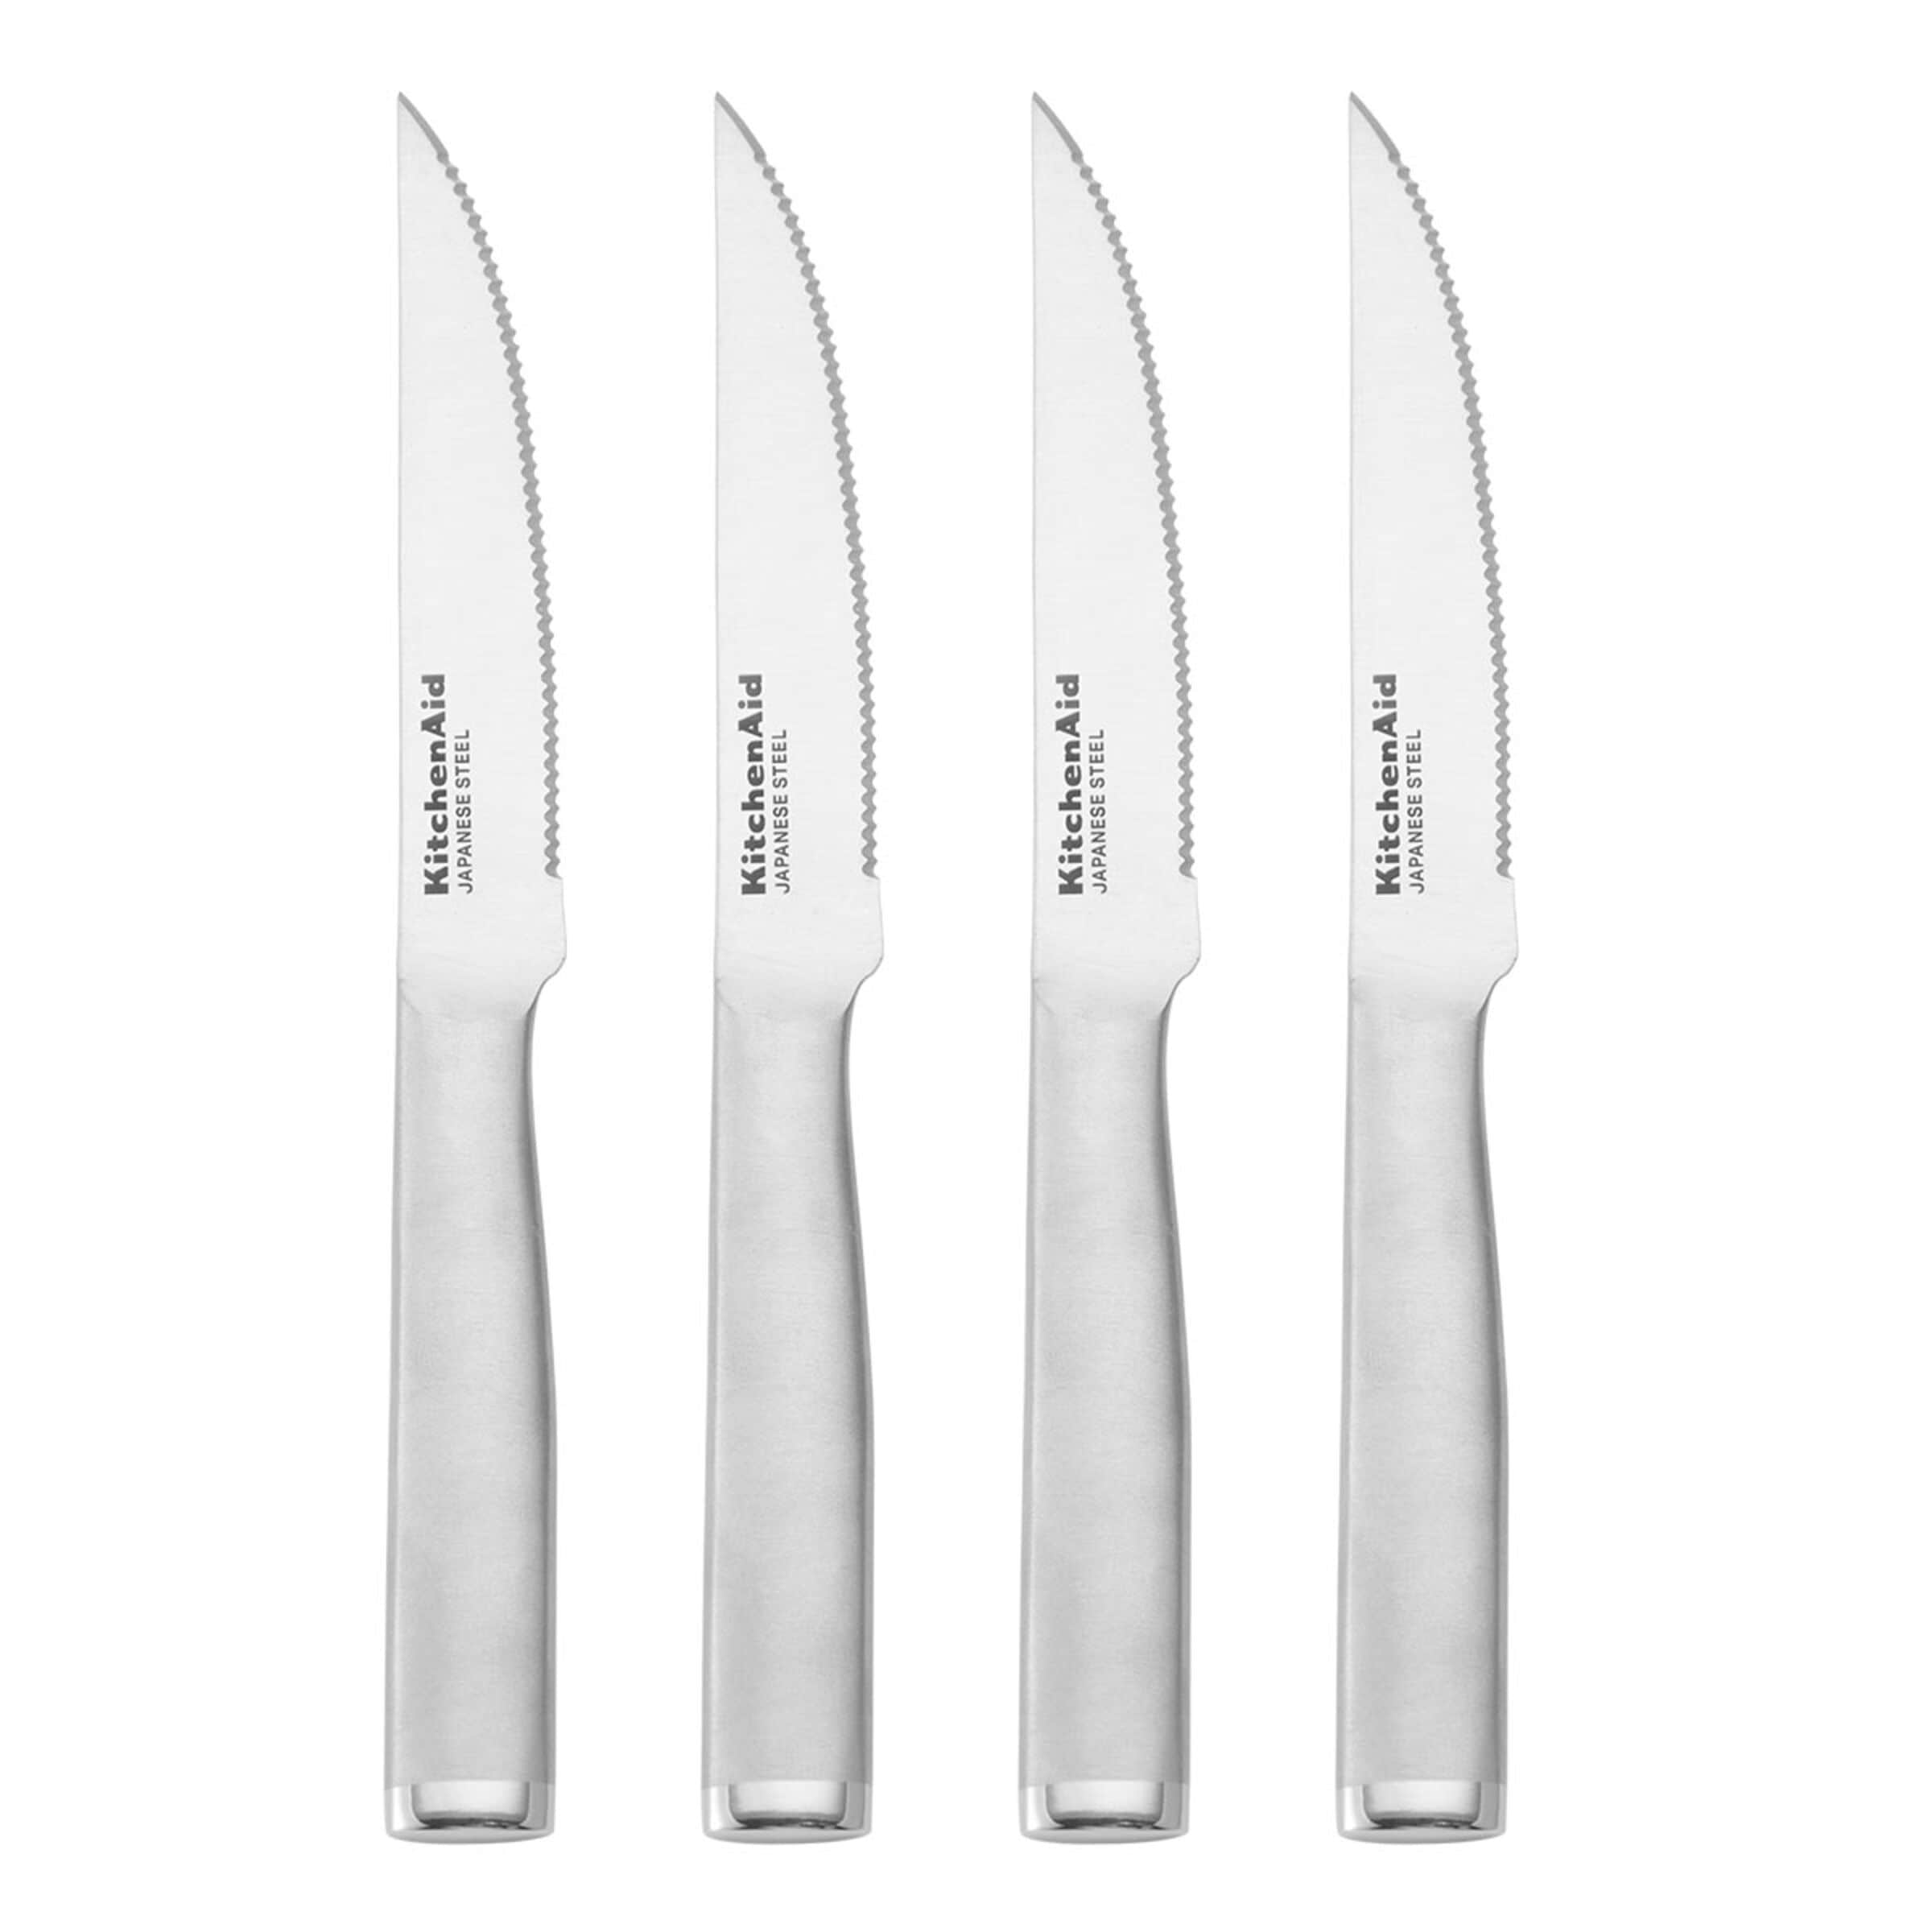 https://ak1.ostkcdn.com/images/products/is/images/direct/dda5dea48aca93dee8149d4bbed7a544df20e9c8/KitchenAid-Gourmet-4-Piece-Steak-Knife-Set%2C-4.5-Inch%2C-Stainless-Steel.jpg